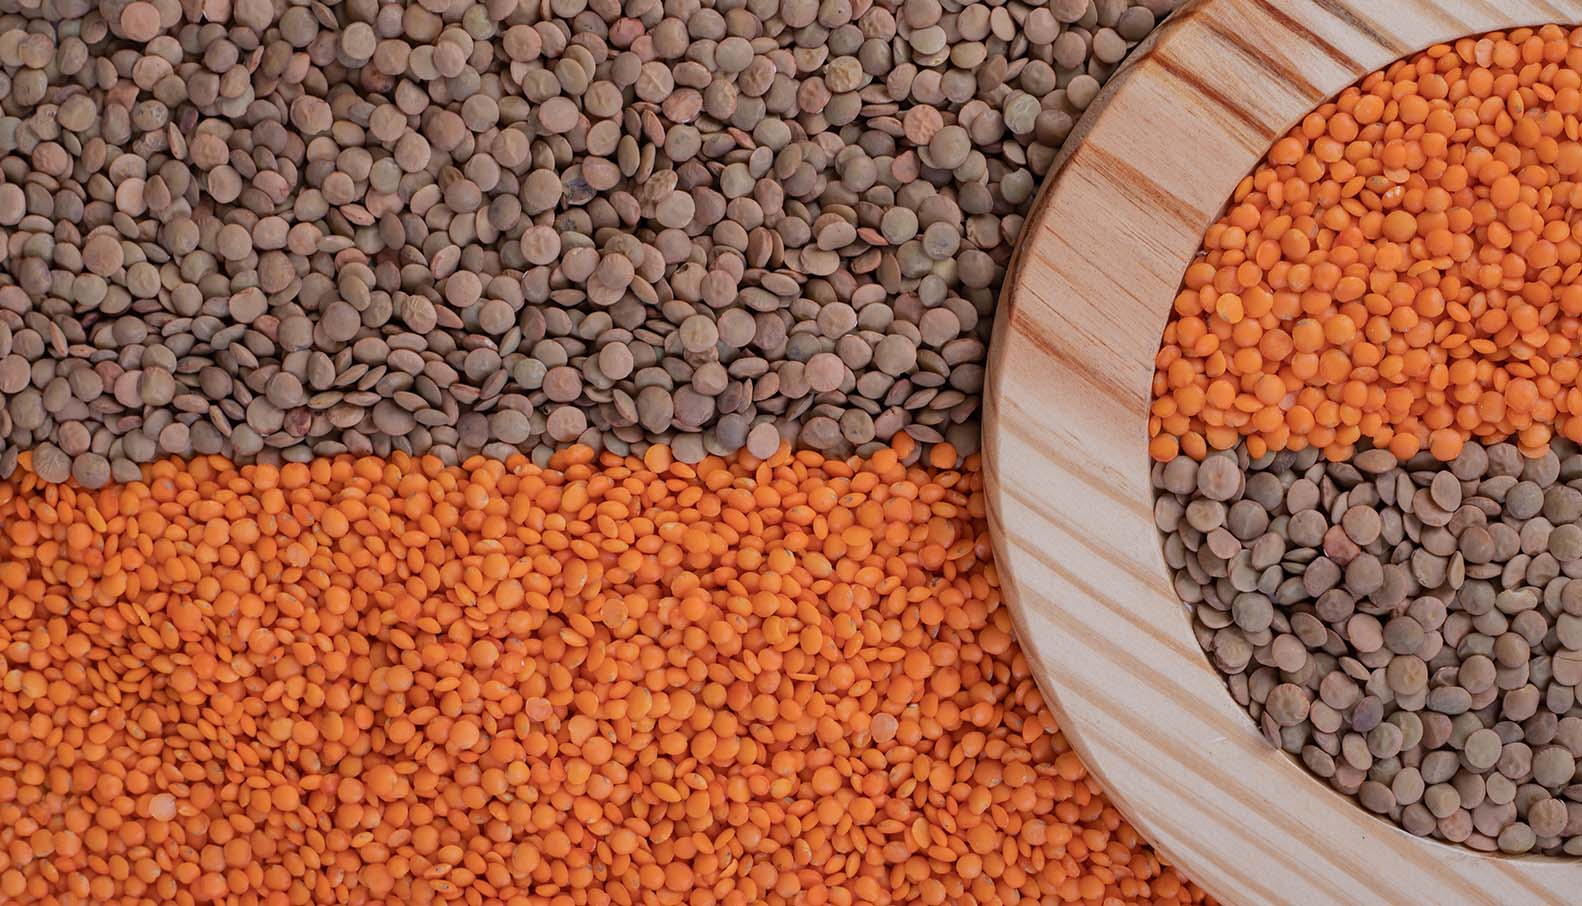 Red-Lentils-Benefits-Nutrition-And-Uses-main-image